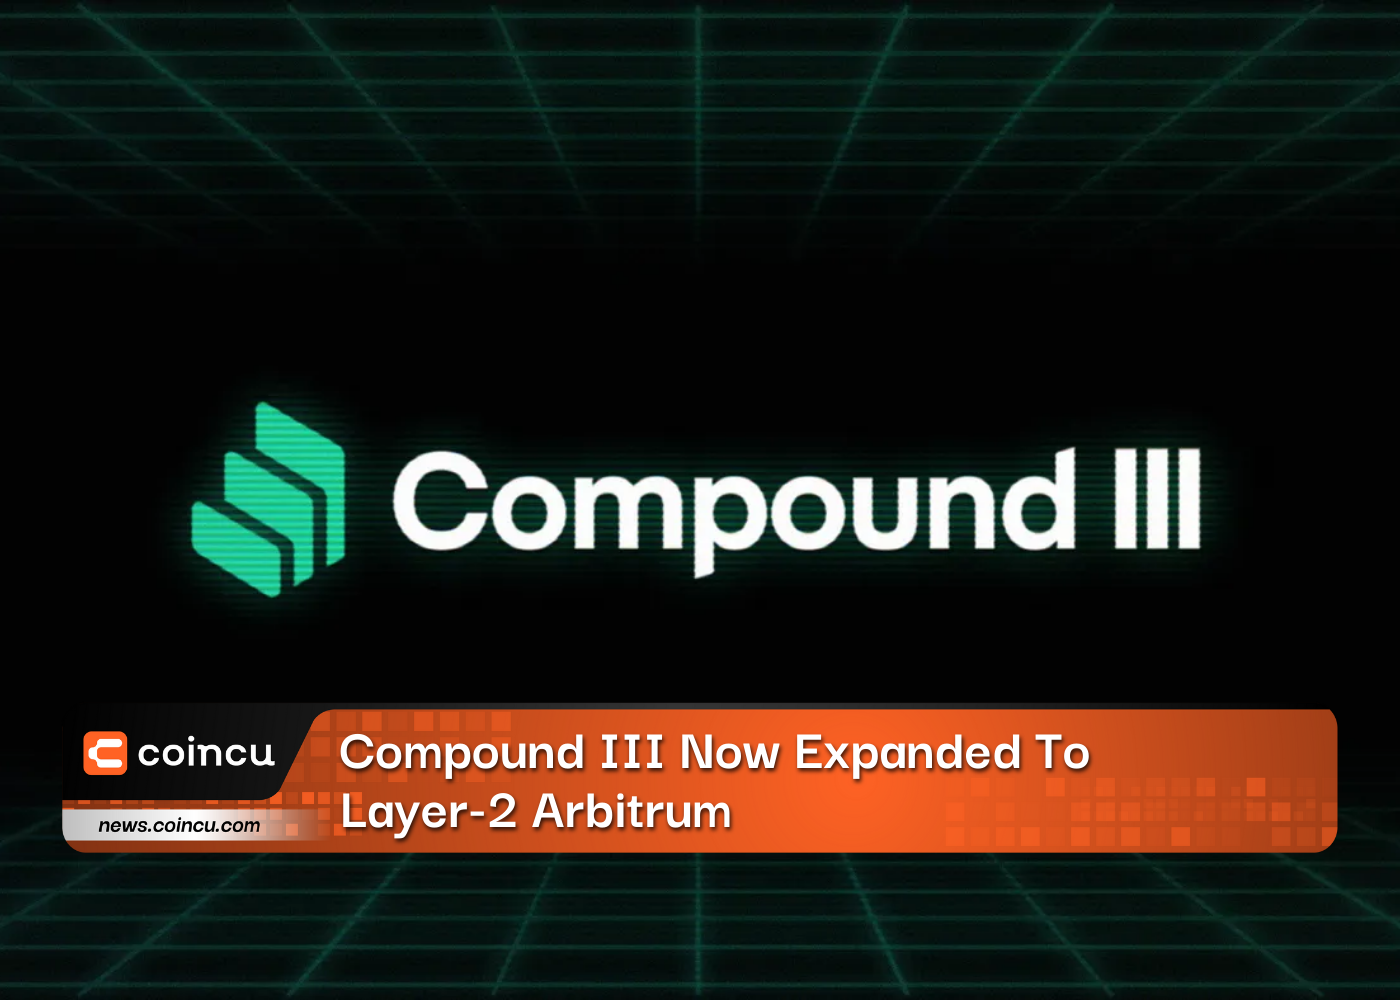 Compound III Now Expanded To Layer-2 Arbitrum